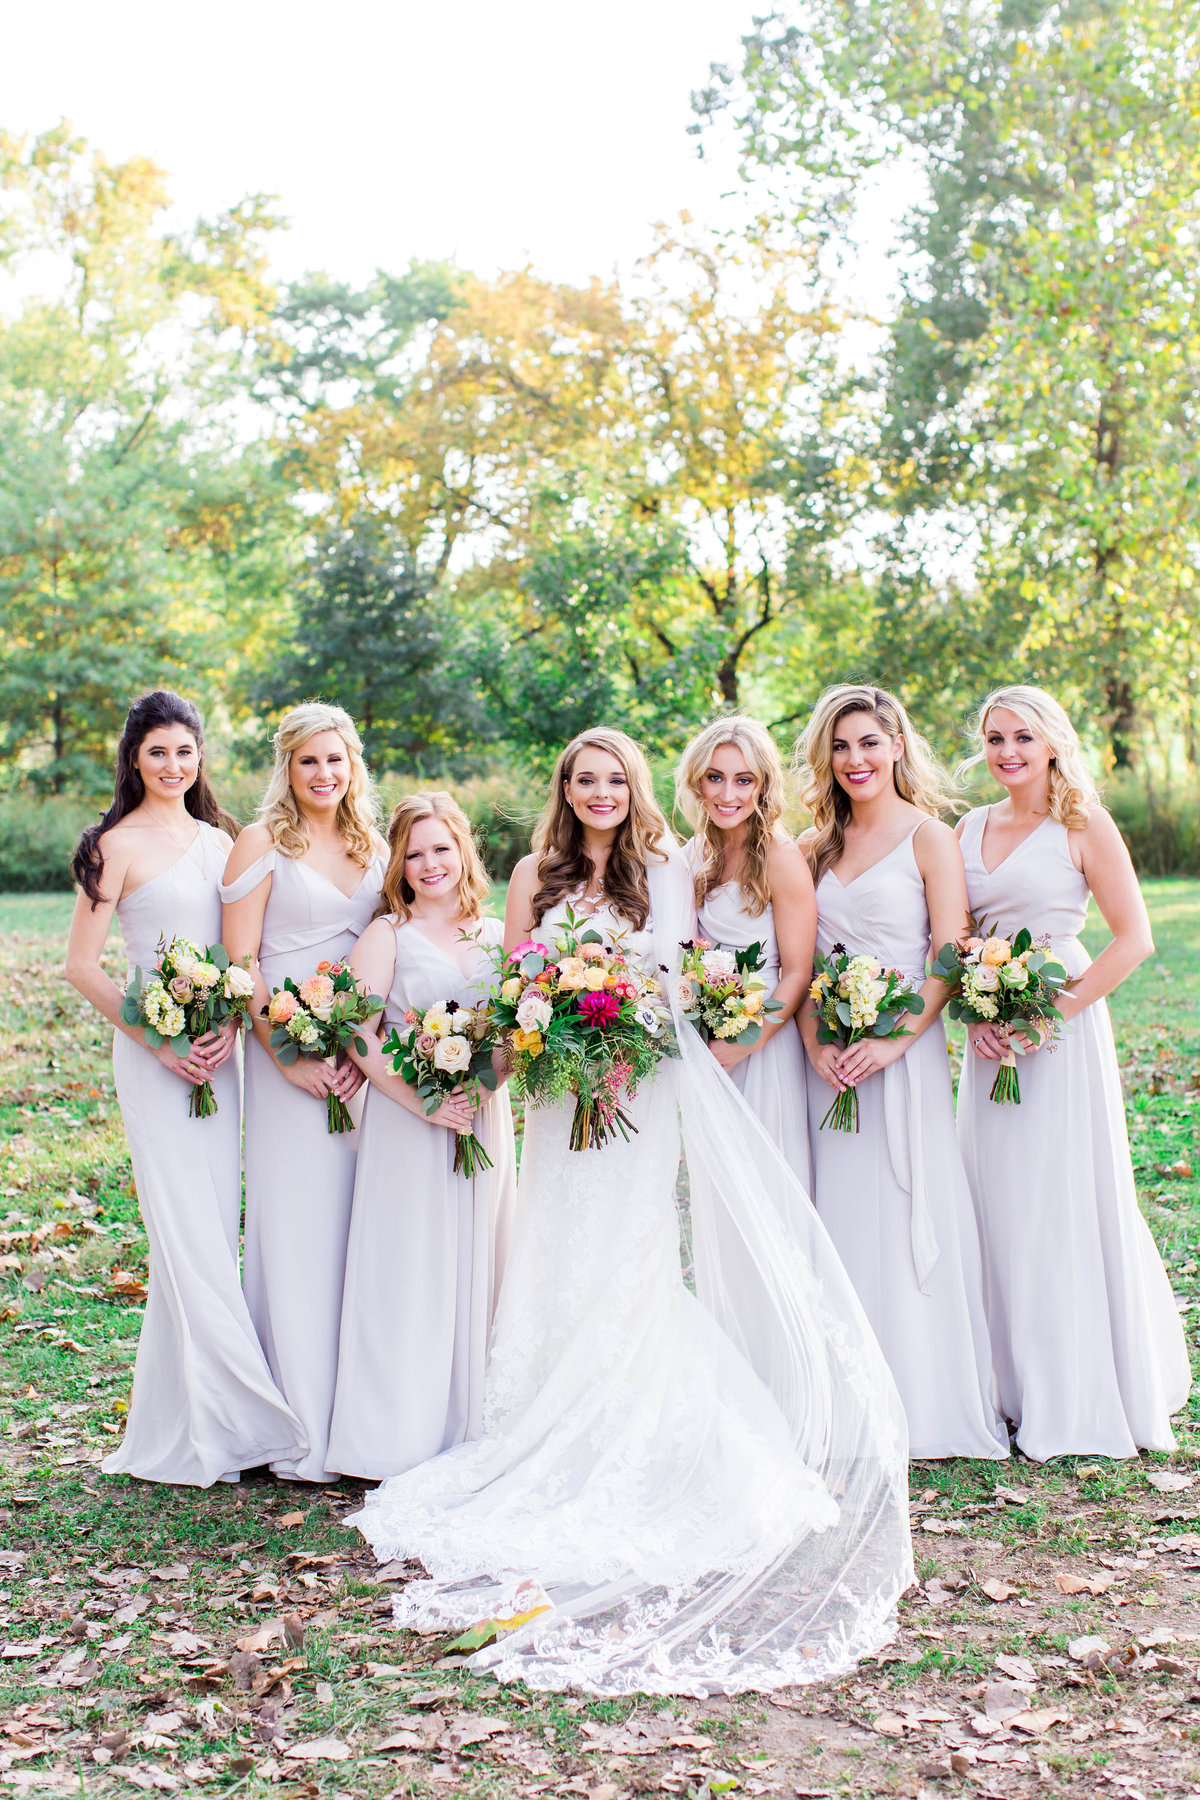 Colorful Floral Wedding at the St. Louis Art Museum